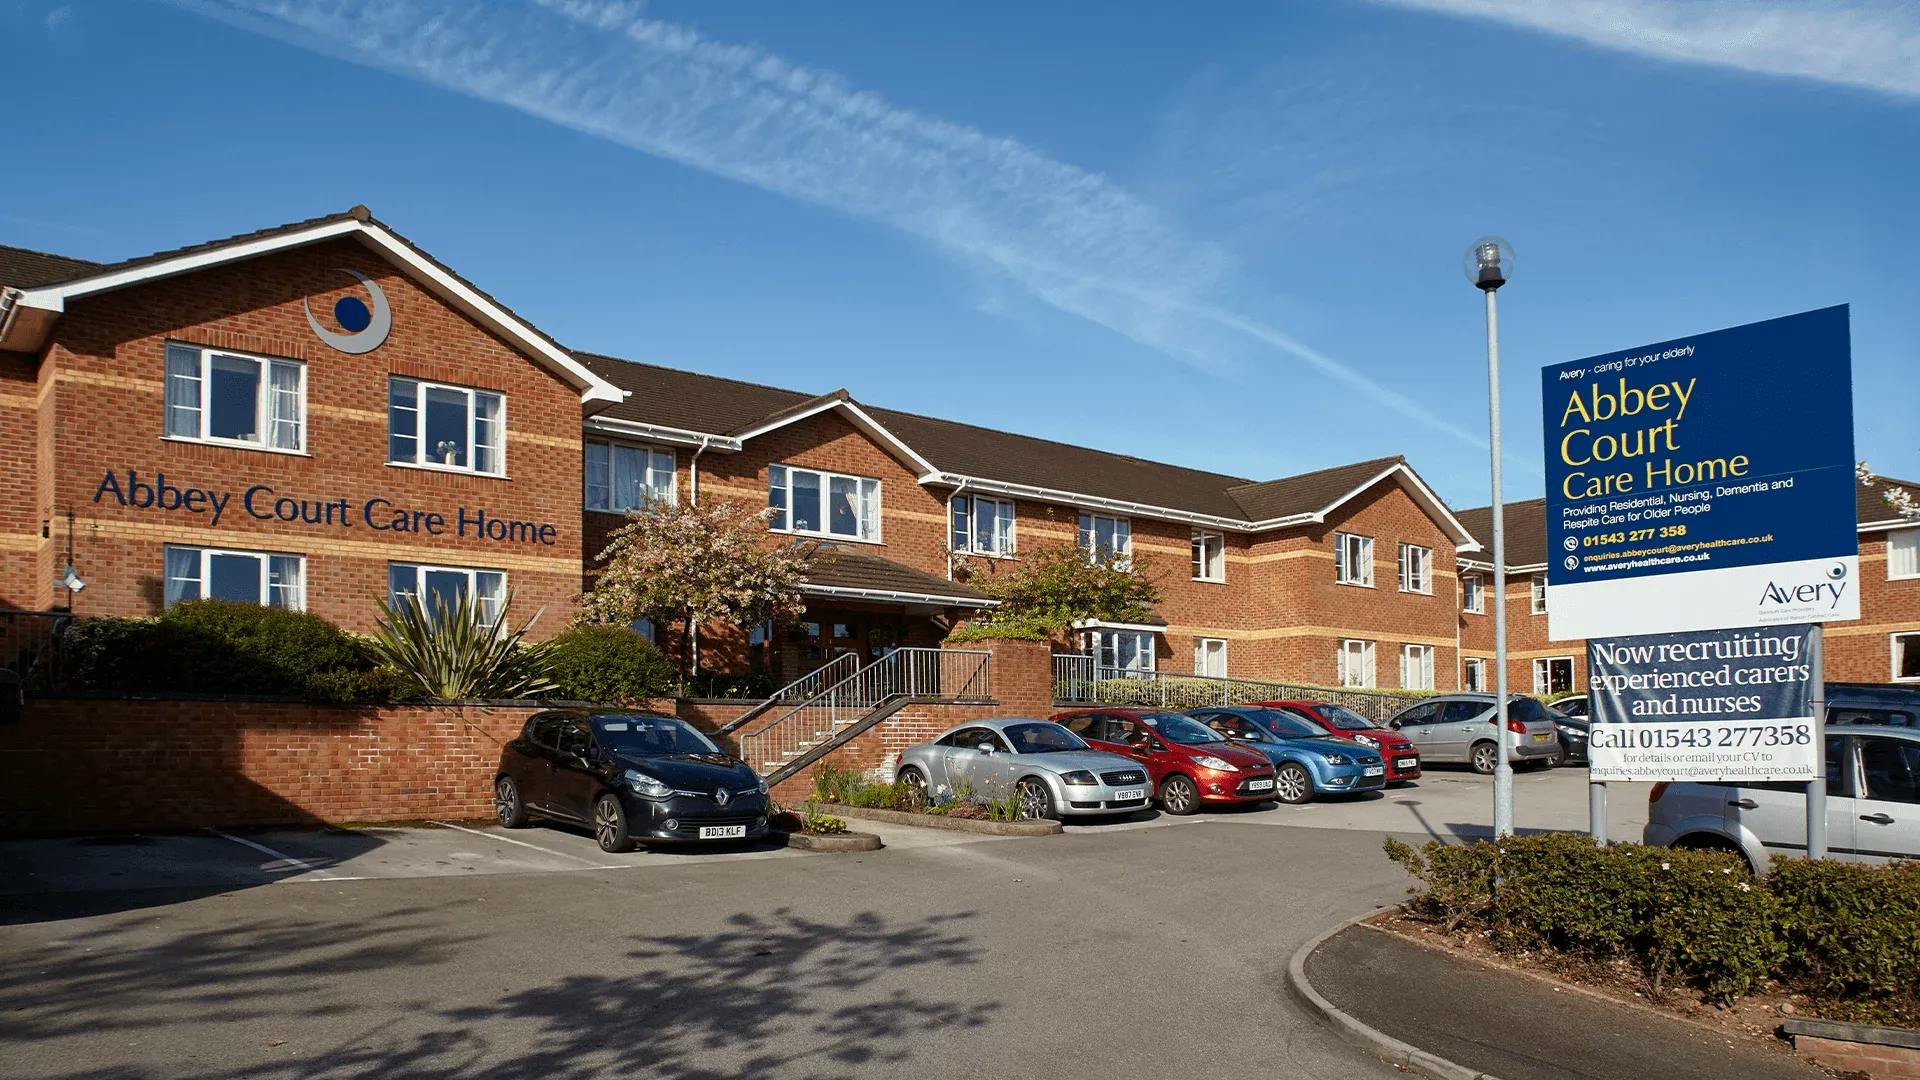 Avery Healthcare - Abbey Court care home 2